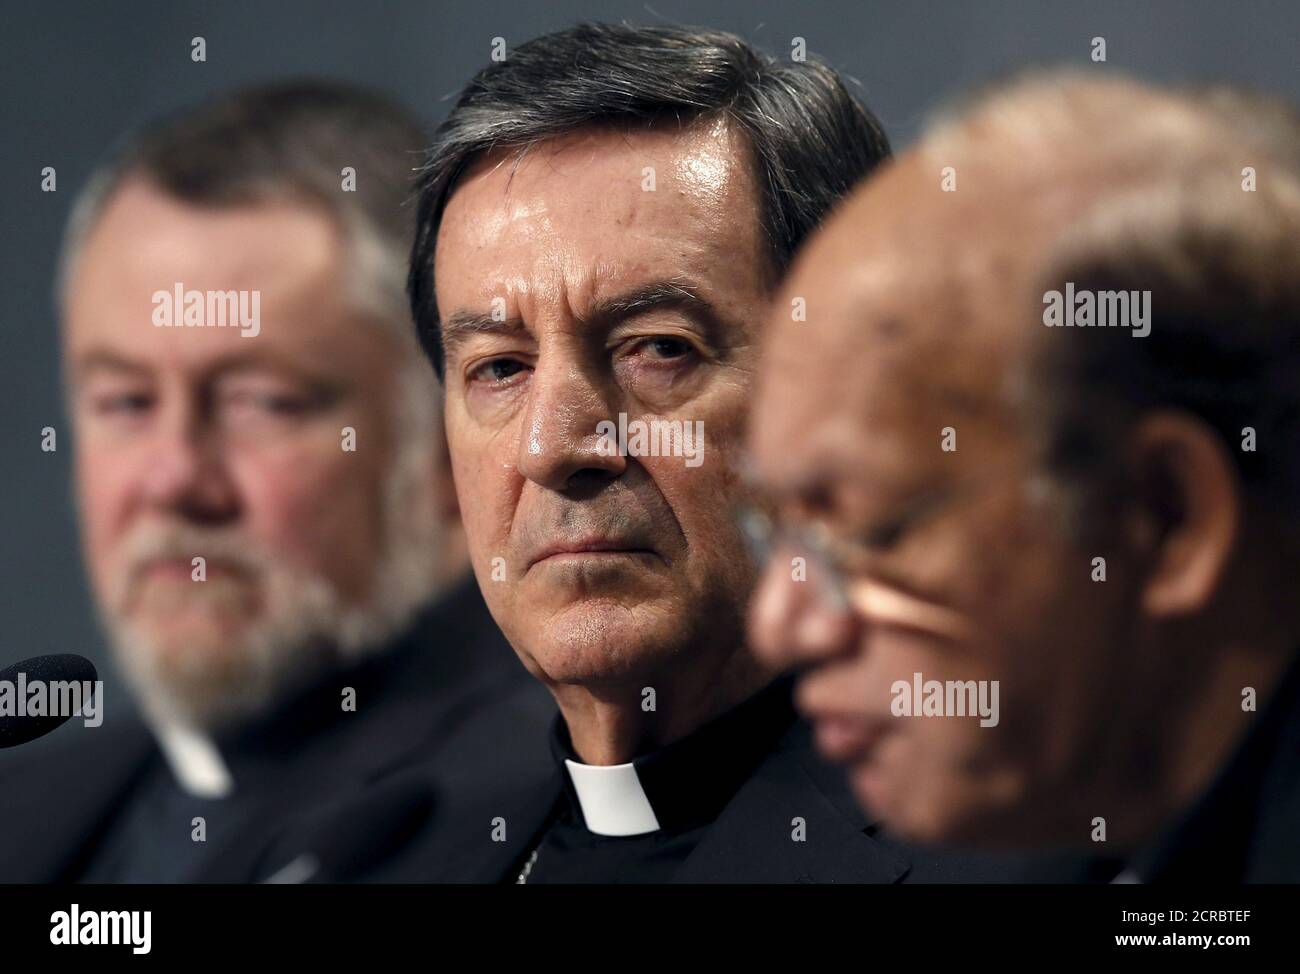 Cardinal Ruben Salazar Gomez (C) looks on as Cardinal Oswald Gracias (R) speaks during a news conference at the Vatican, October 26, 2015. Roman Catholic leaders from around the world on Monday made a joint appeal to a forthcoming United Nations conference on climate change to produce a 'fair, legally binding and truly transformational' agreement.REUTERS/Alessandro Bianchi Stock Photo